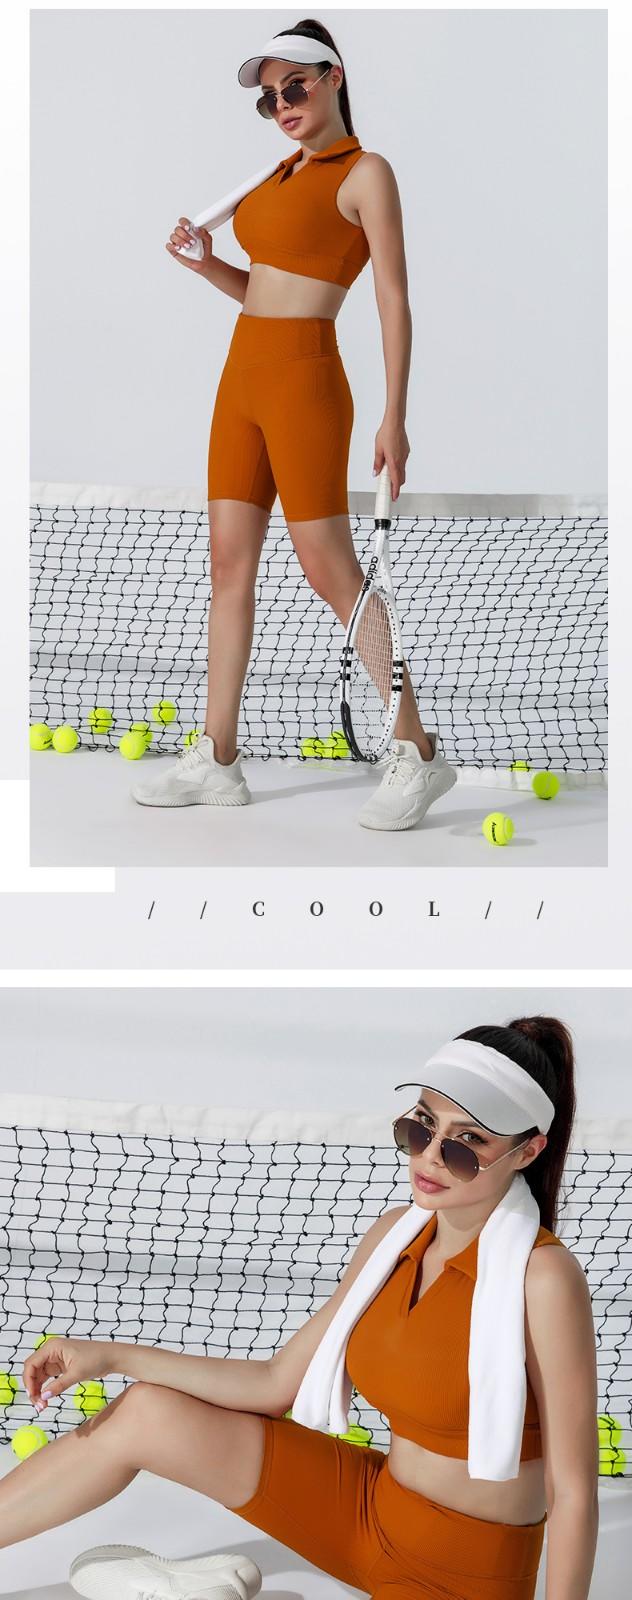 soft women's tennis outfits for-sale for ladies